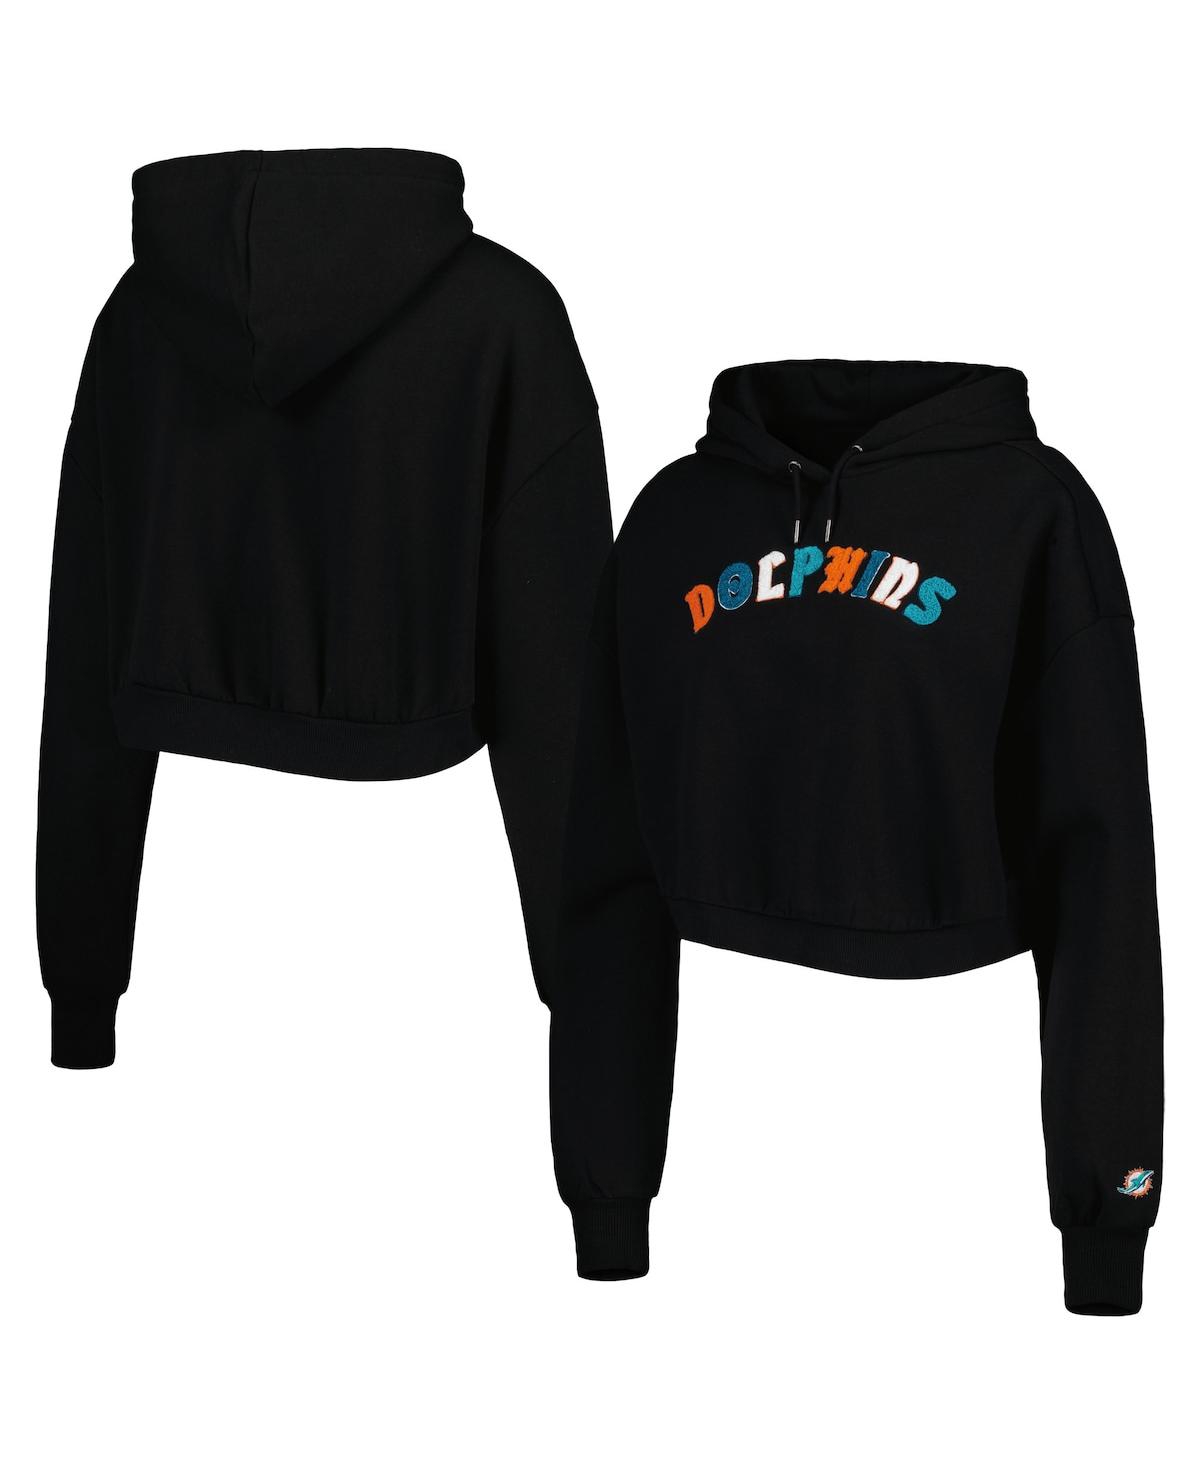 THE WILD COLLECTIVE WOMEN'S THE WILD COLLECTIVE BLACK MIAMI DOLPHINS CROPPED PULLOVER HOODIE